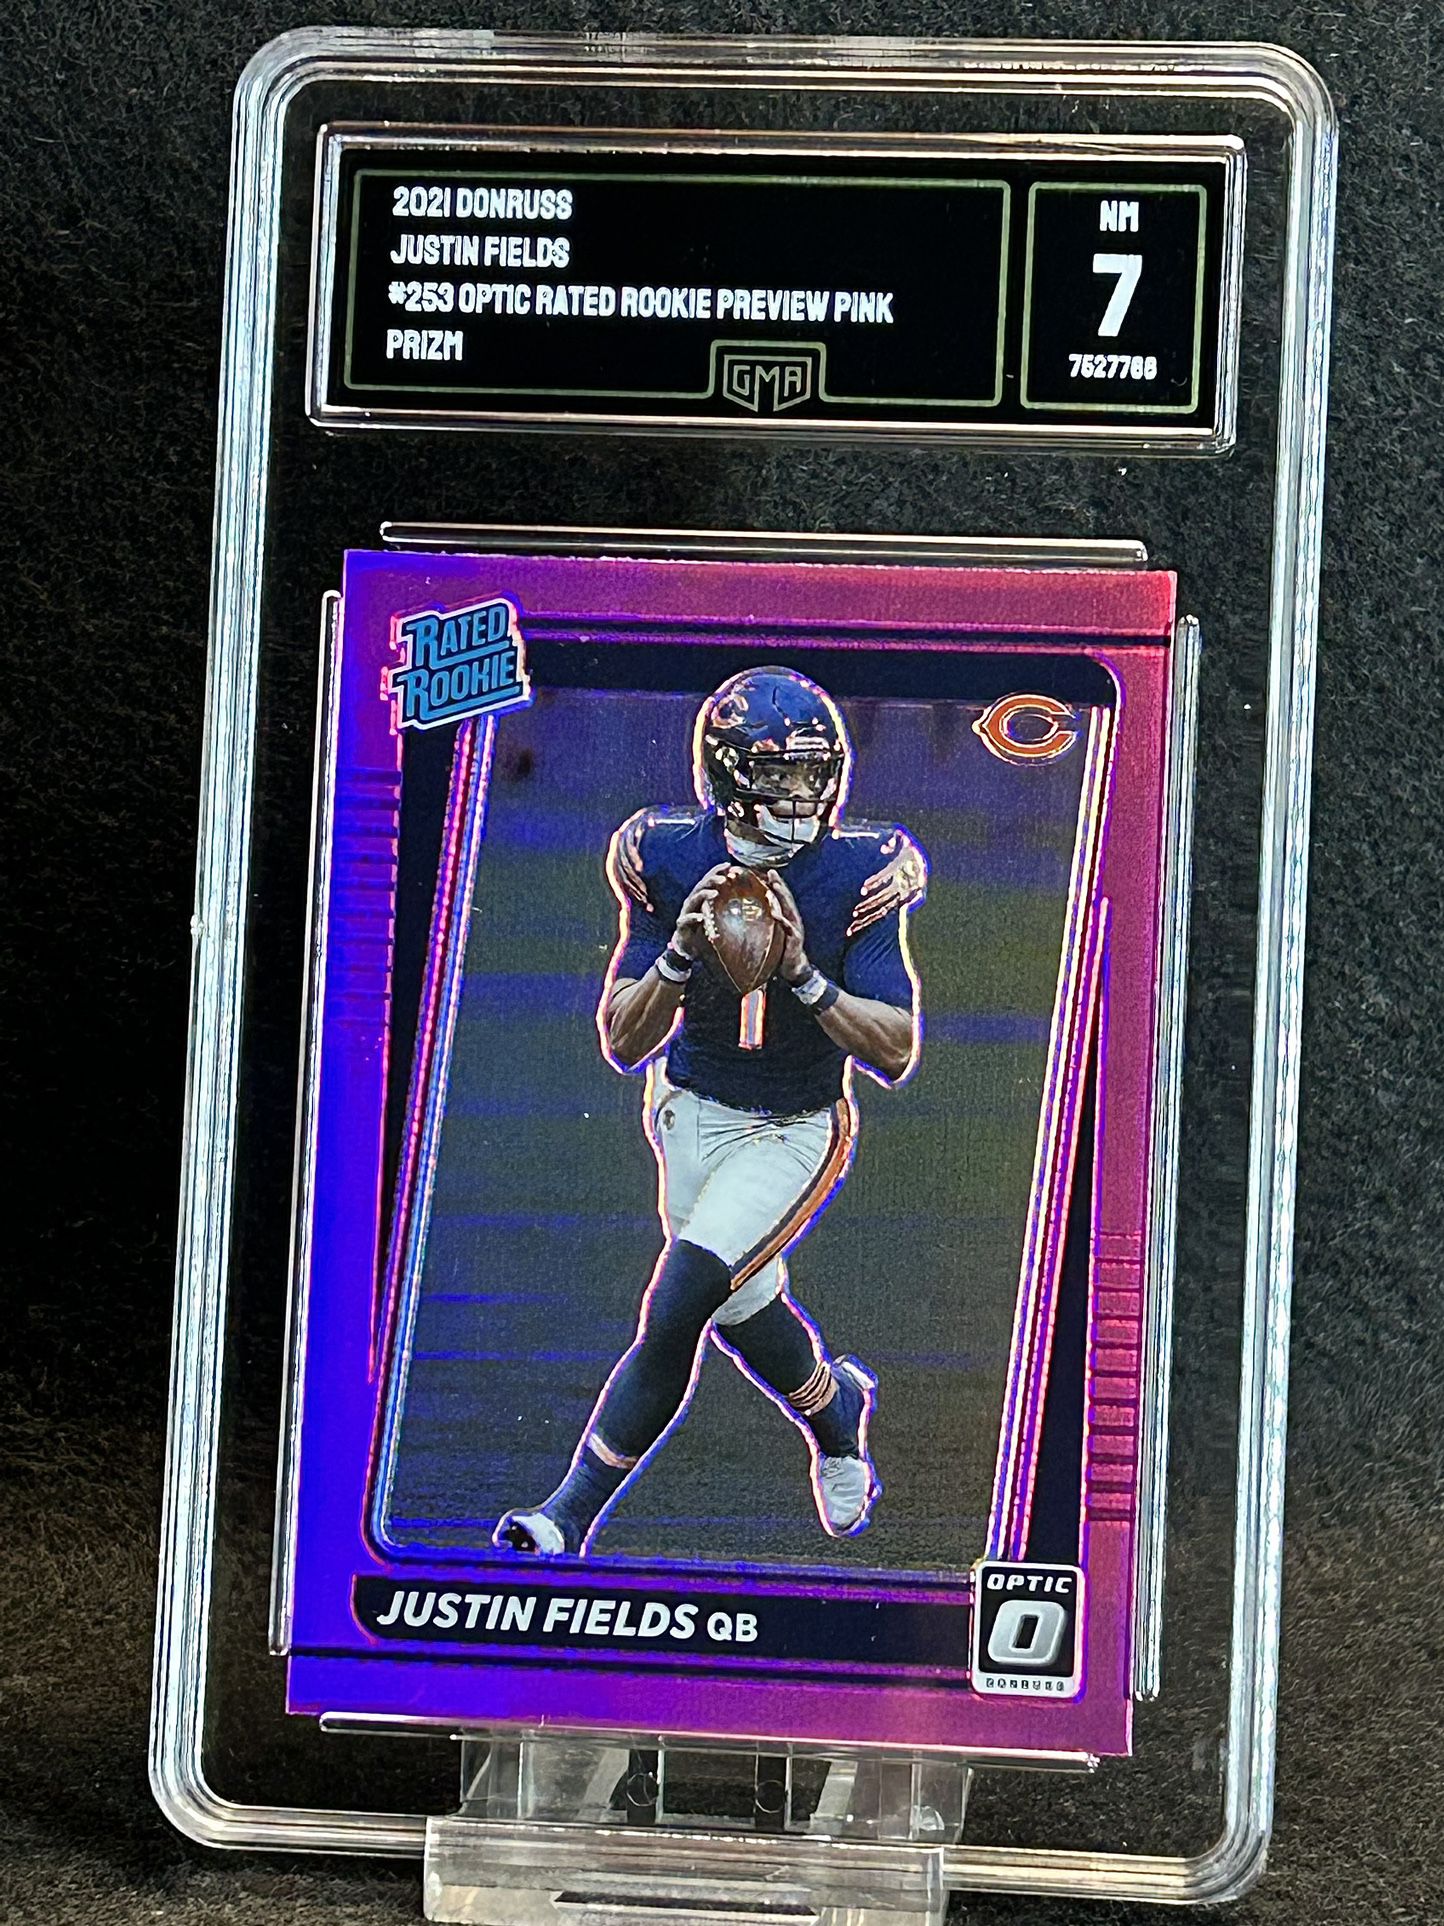 2021 Donruss 🔥 Justin Fields 🔥 Optic Rated Rookie Preview Pink Prizm GMA 7 NM 💎 - Bears / Pittsburgh Steelers 